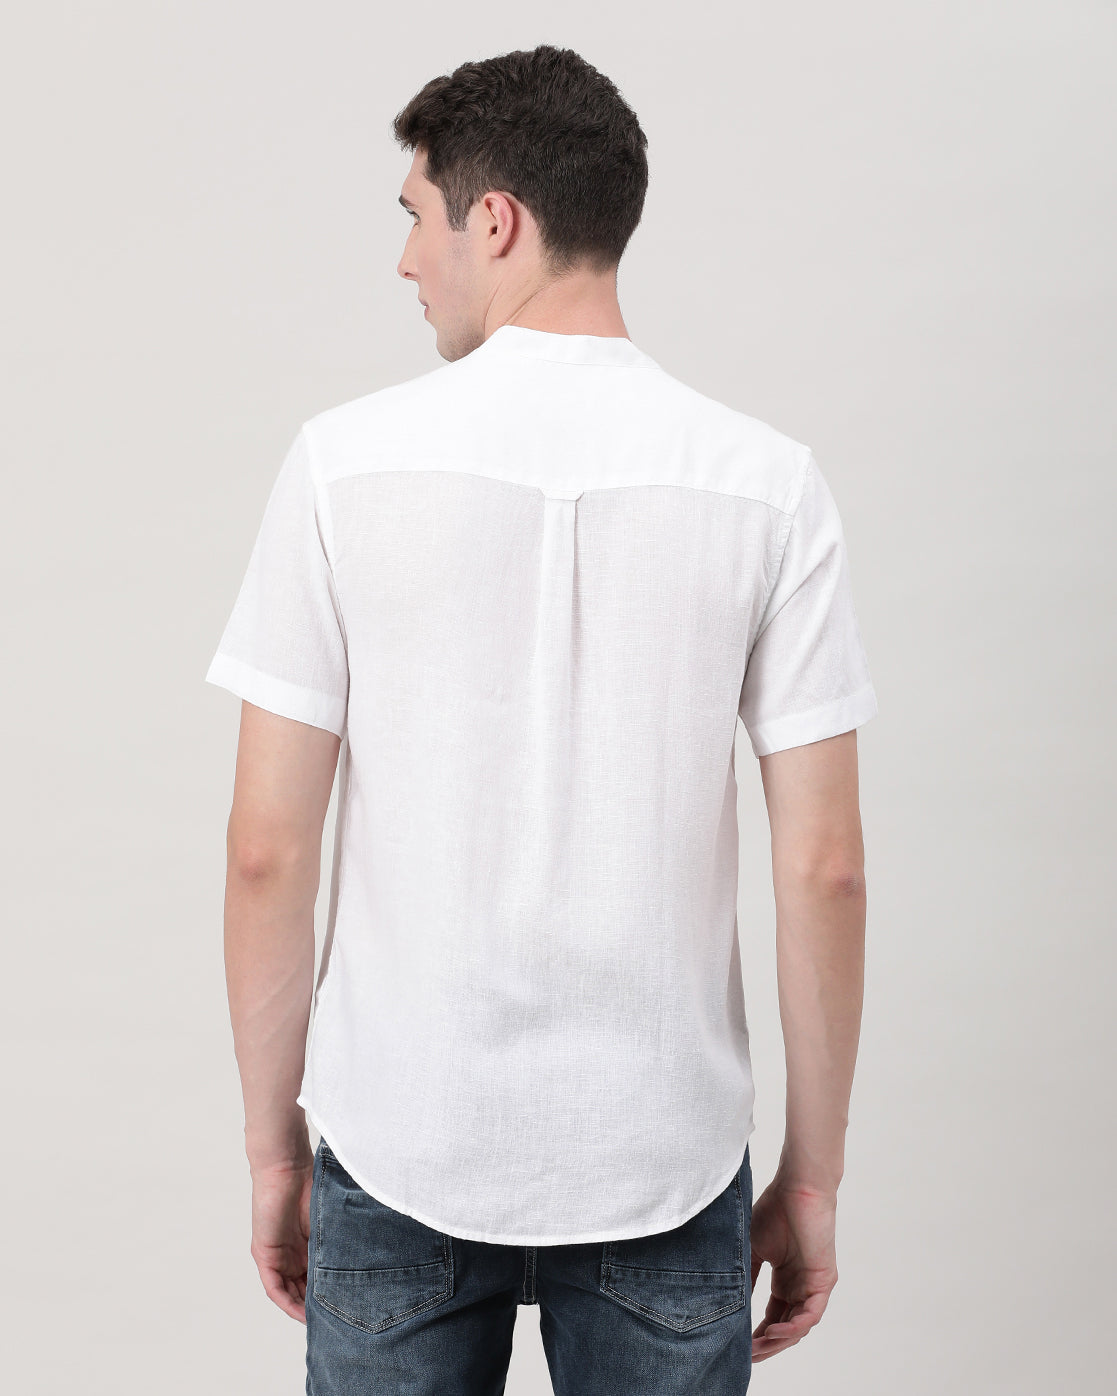 Casual White Half Sleeve Comfort Fit Solid Shirt with Collar for Men